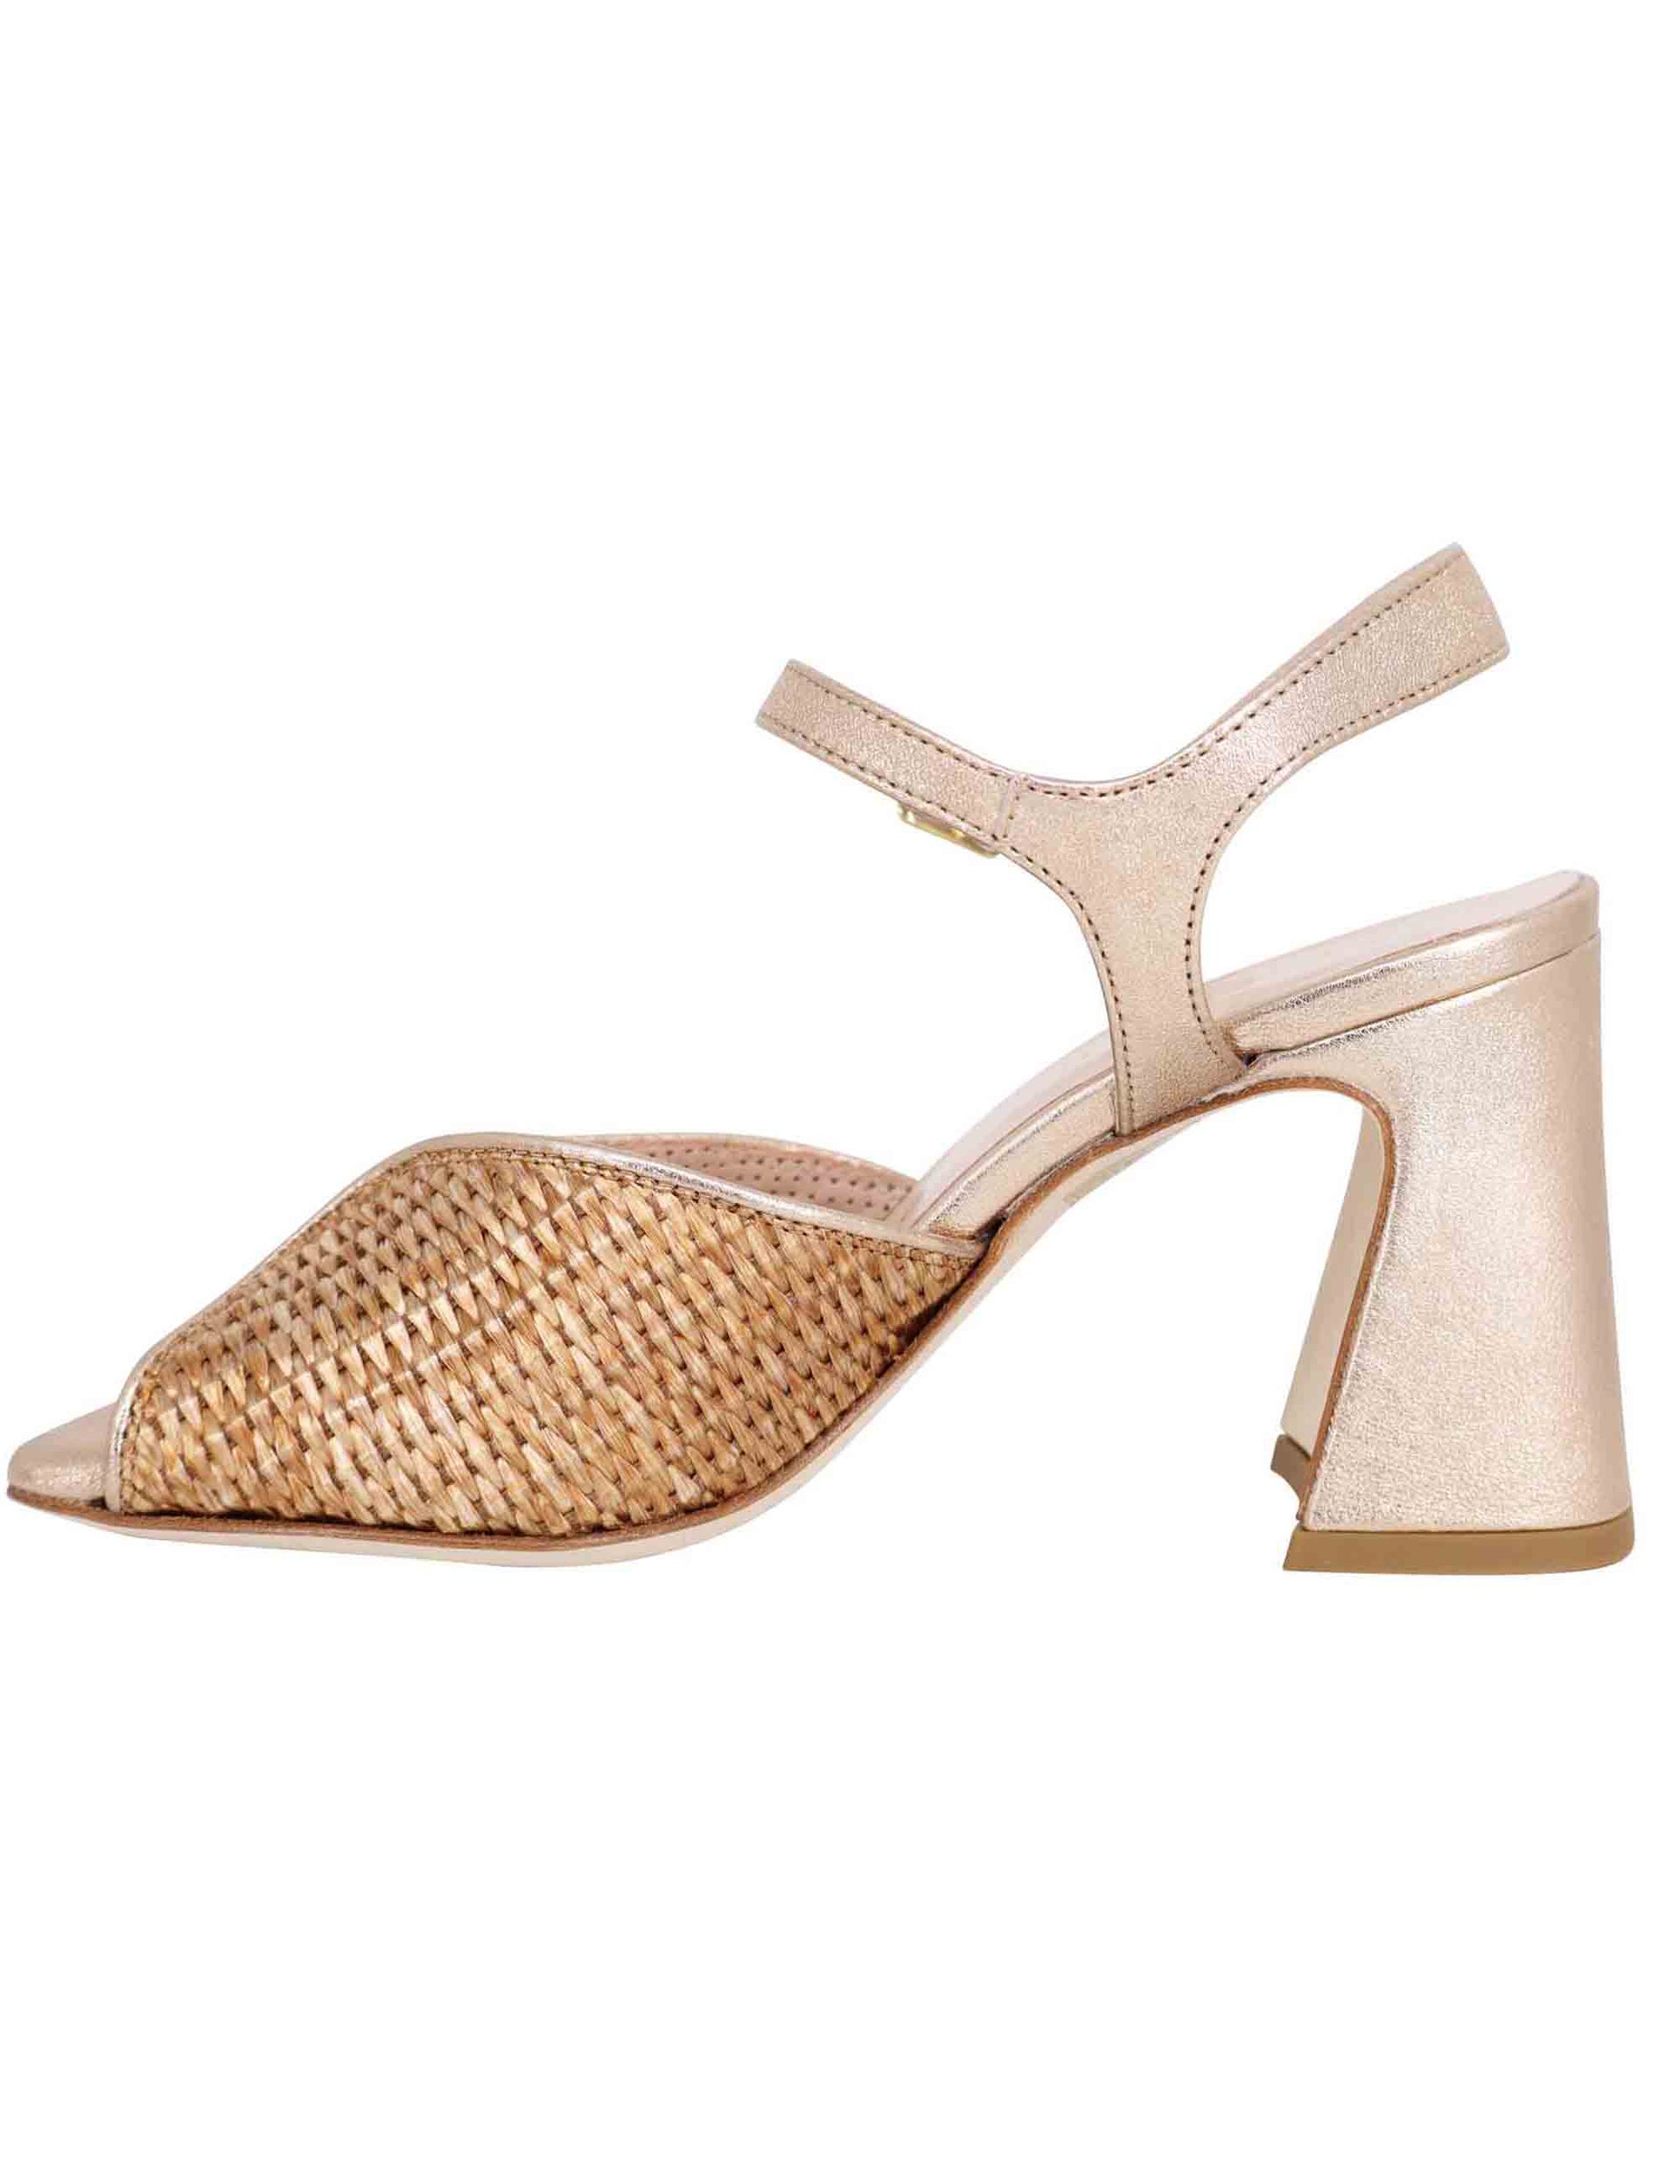 Women's sandals in gold laminated leather with high heel and ankle strap